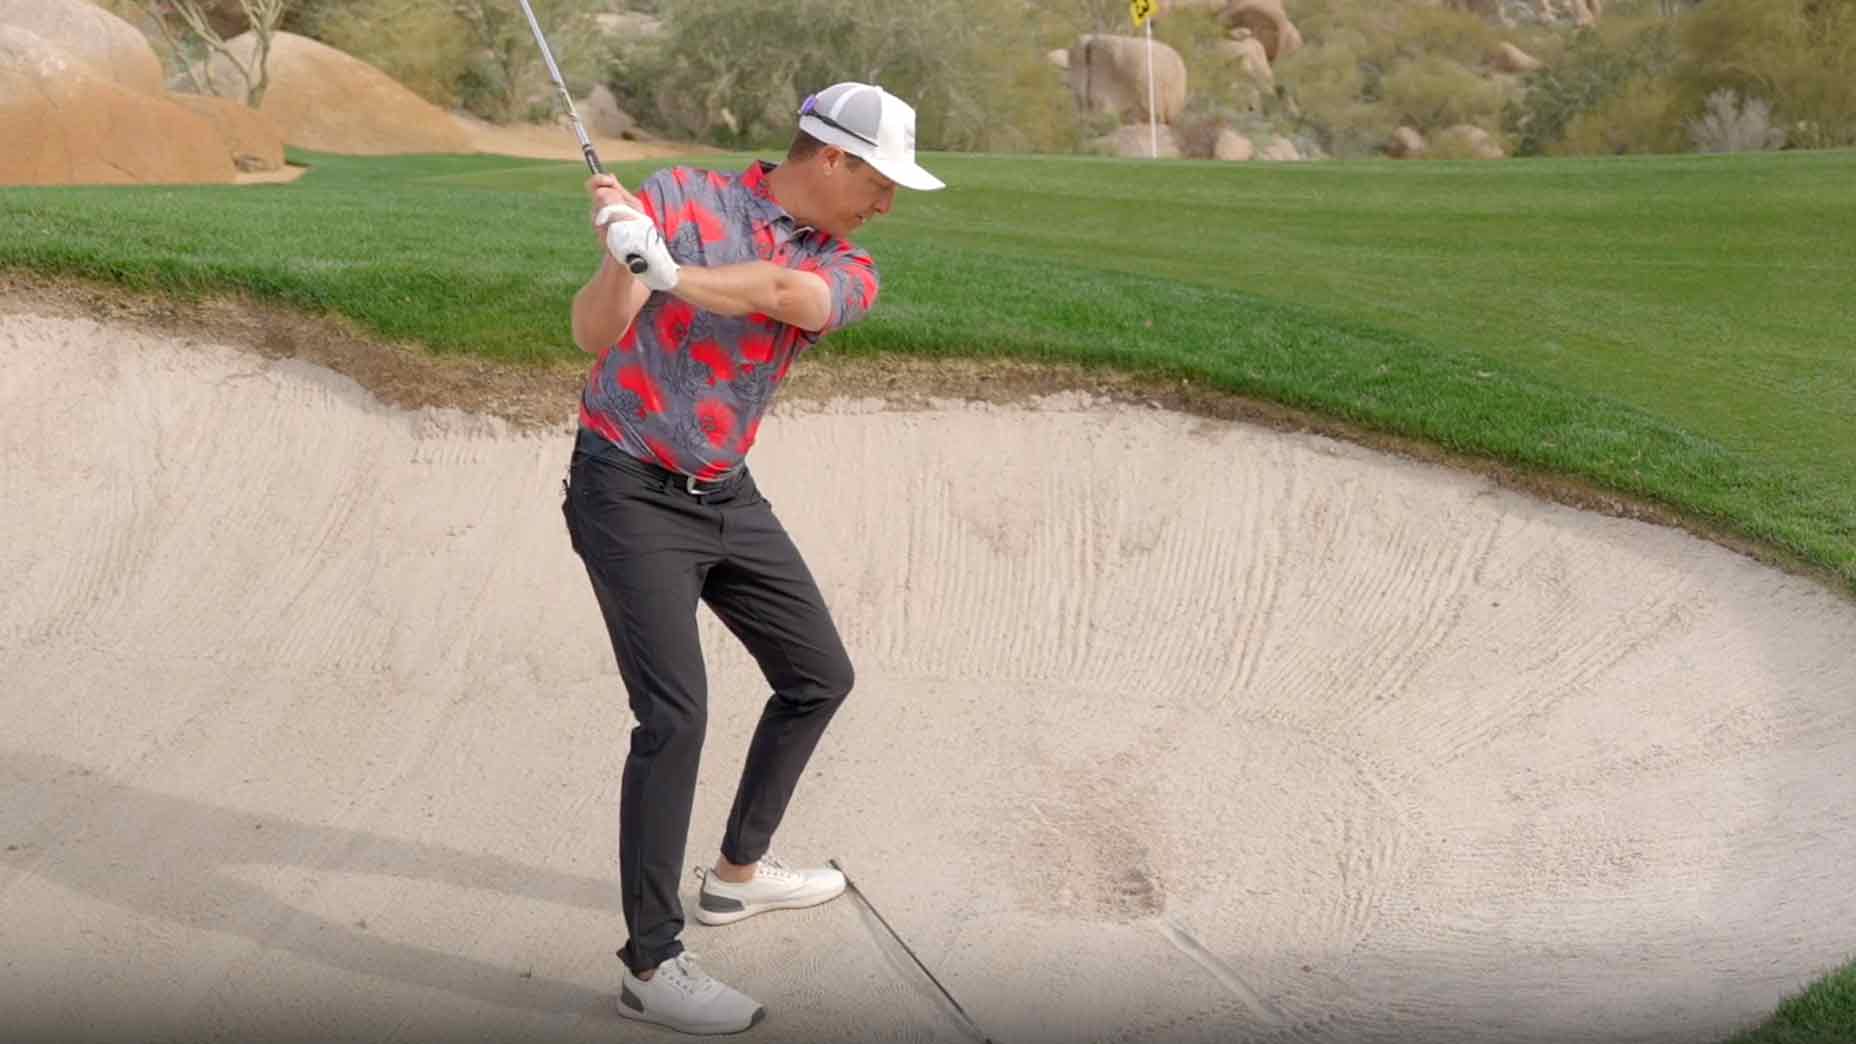 Parker McLachlin, aka Short Game Chef, shows how a more modern approach to the bunker setup can lead to better results from the sand